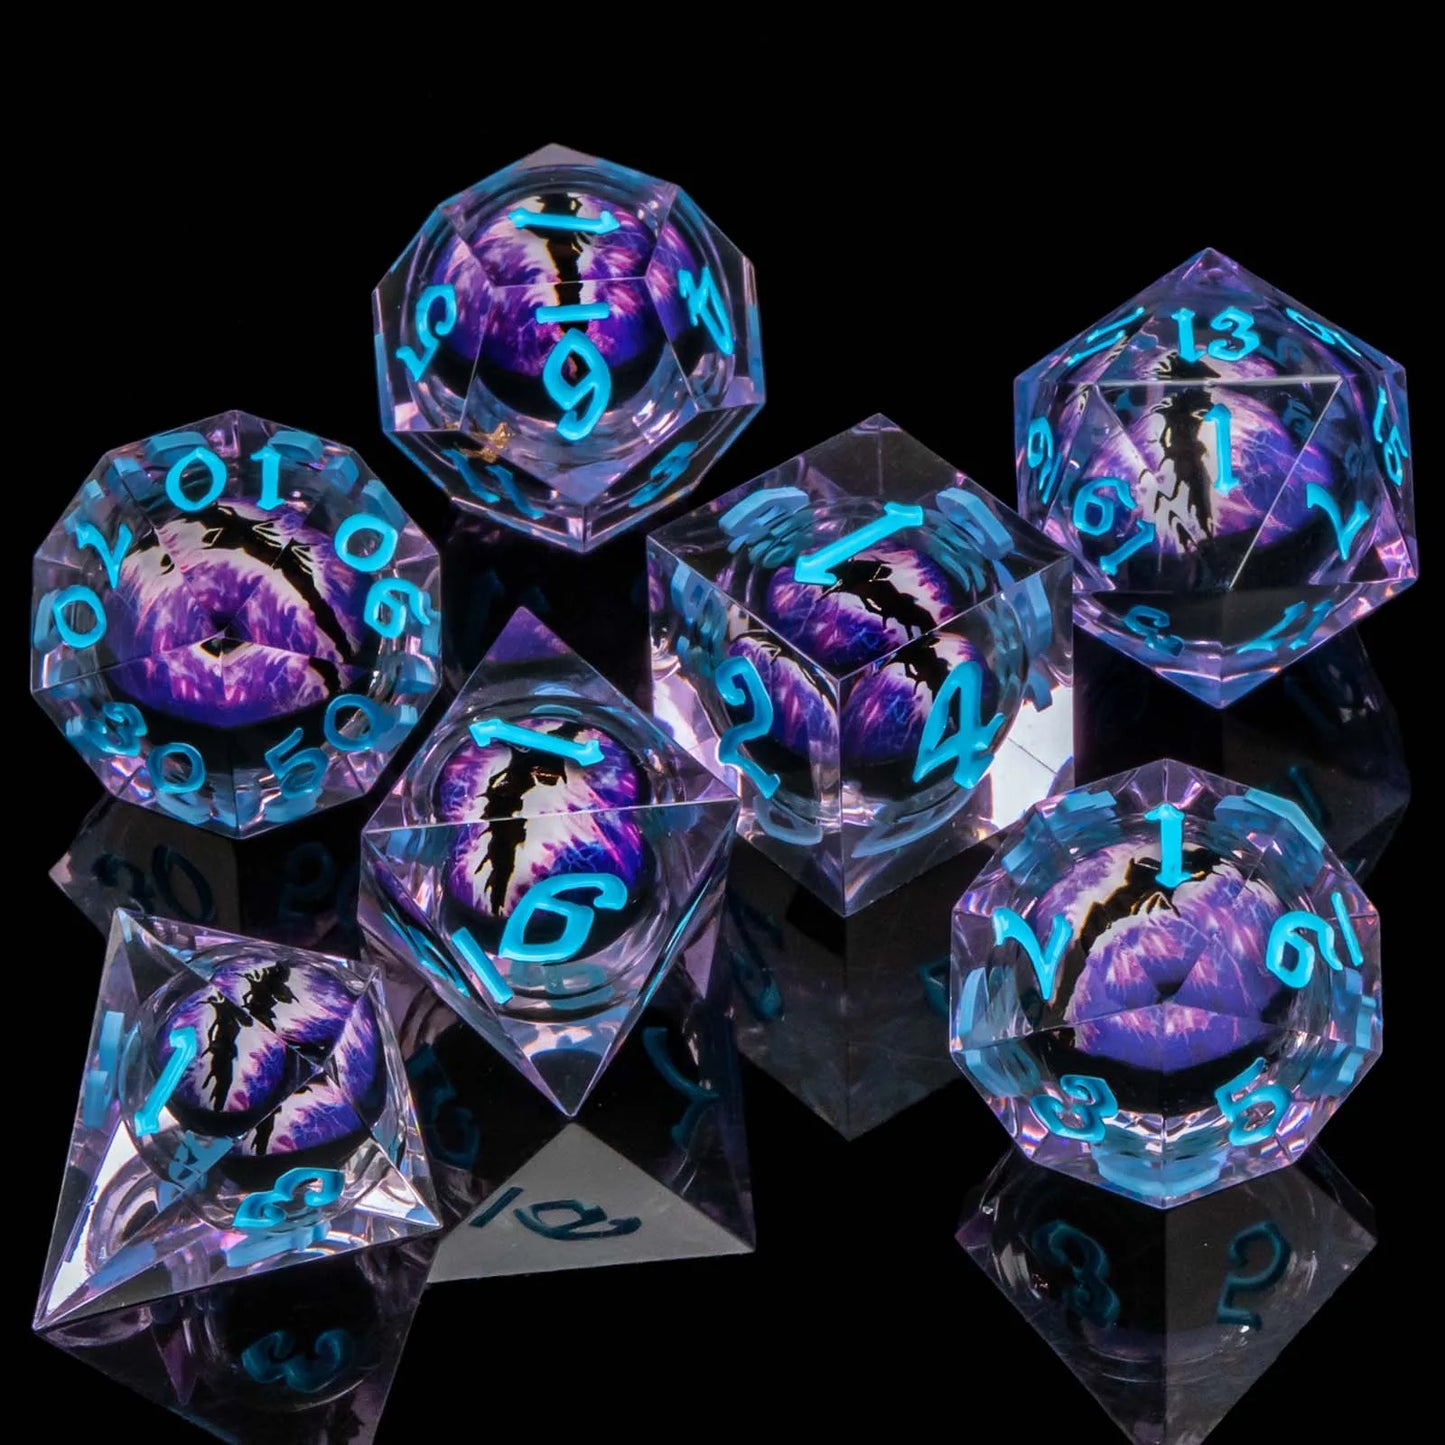 D and D Flowing Sand Sharp Edge Dragon Eye Dnd Resin RPG Polyhedral D&D Dice Set For Dungeon and Dragon Pathfinder Role Playing AZ13